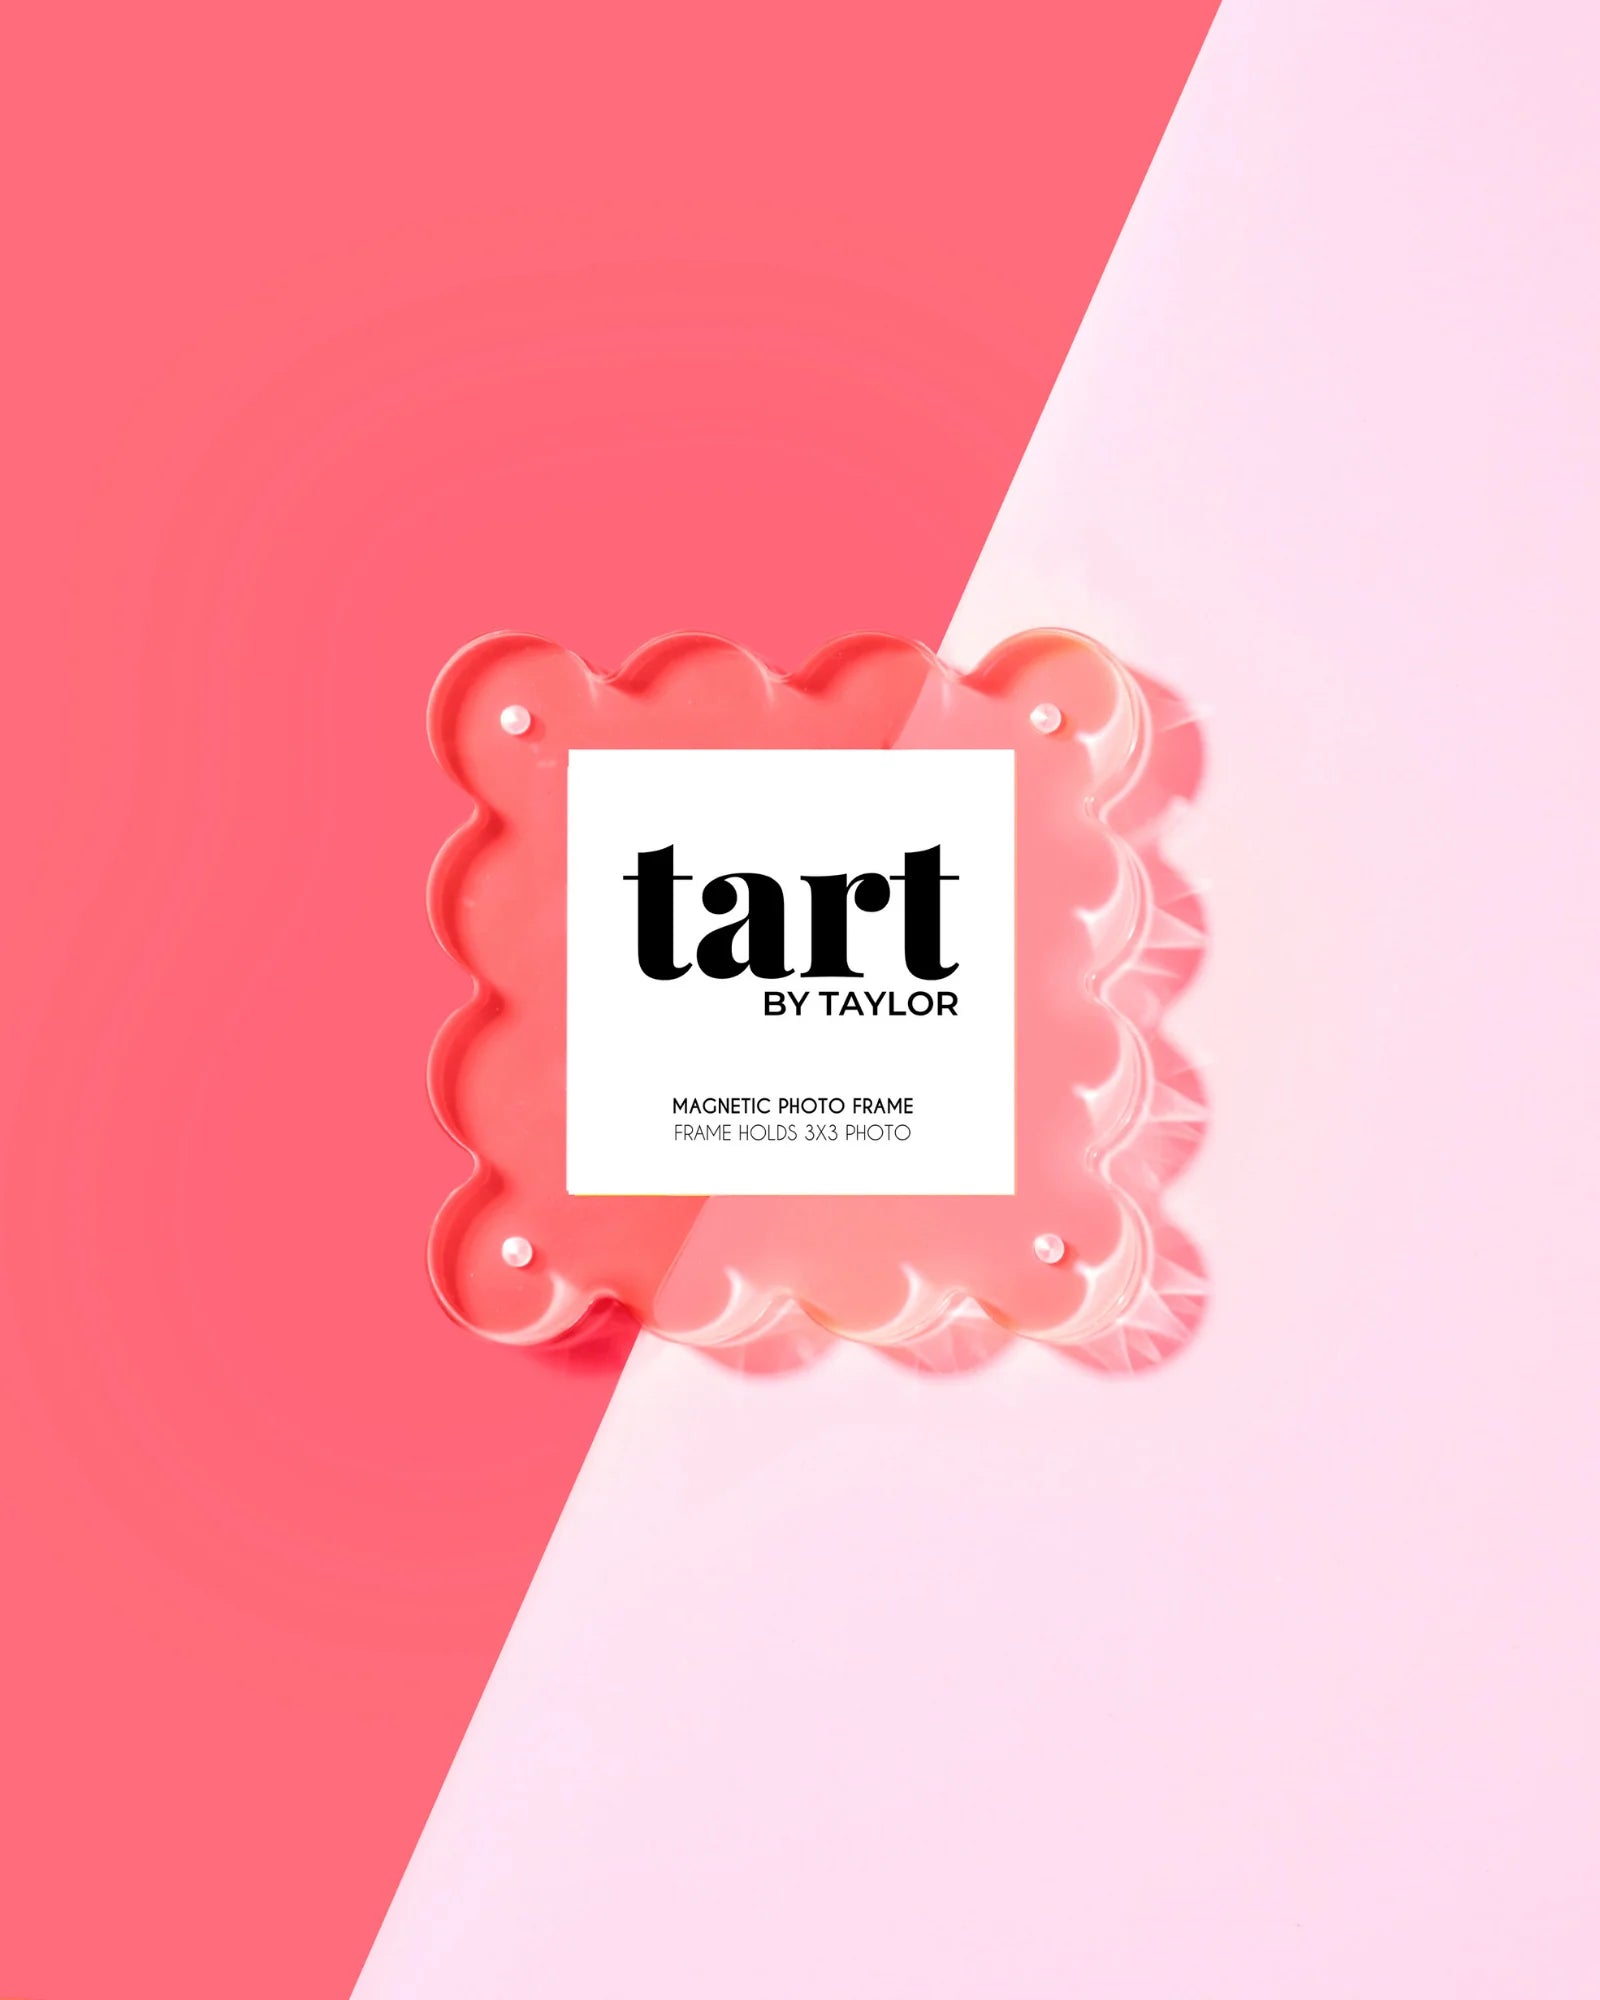 Tart by Taylor Mini Acrylic Frames, Assorted Colors